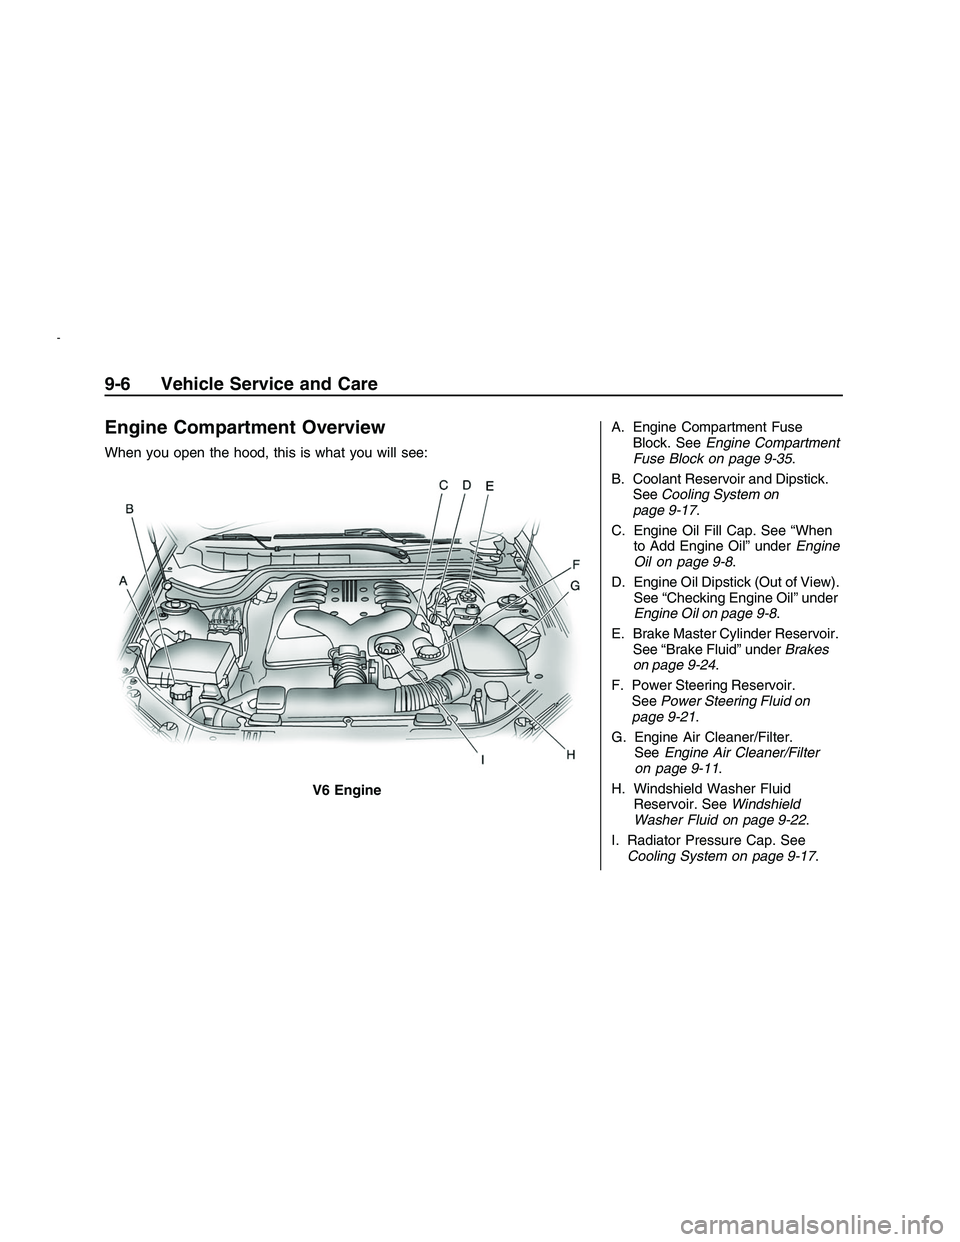 PONTIAC G8 2008  Owners Manual Engine Compartment Overview
When you open the hood, this is what you will see:A. Engine Compartment Fuse
Block. See Engine Compartment
Fuse Block on page 9-35 .
B. Coolant Reservoir and Dipstick. See 